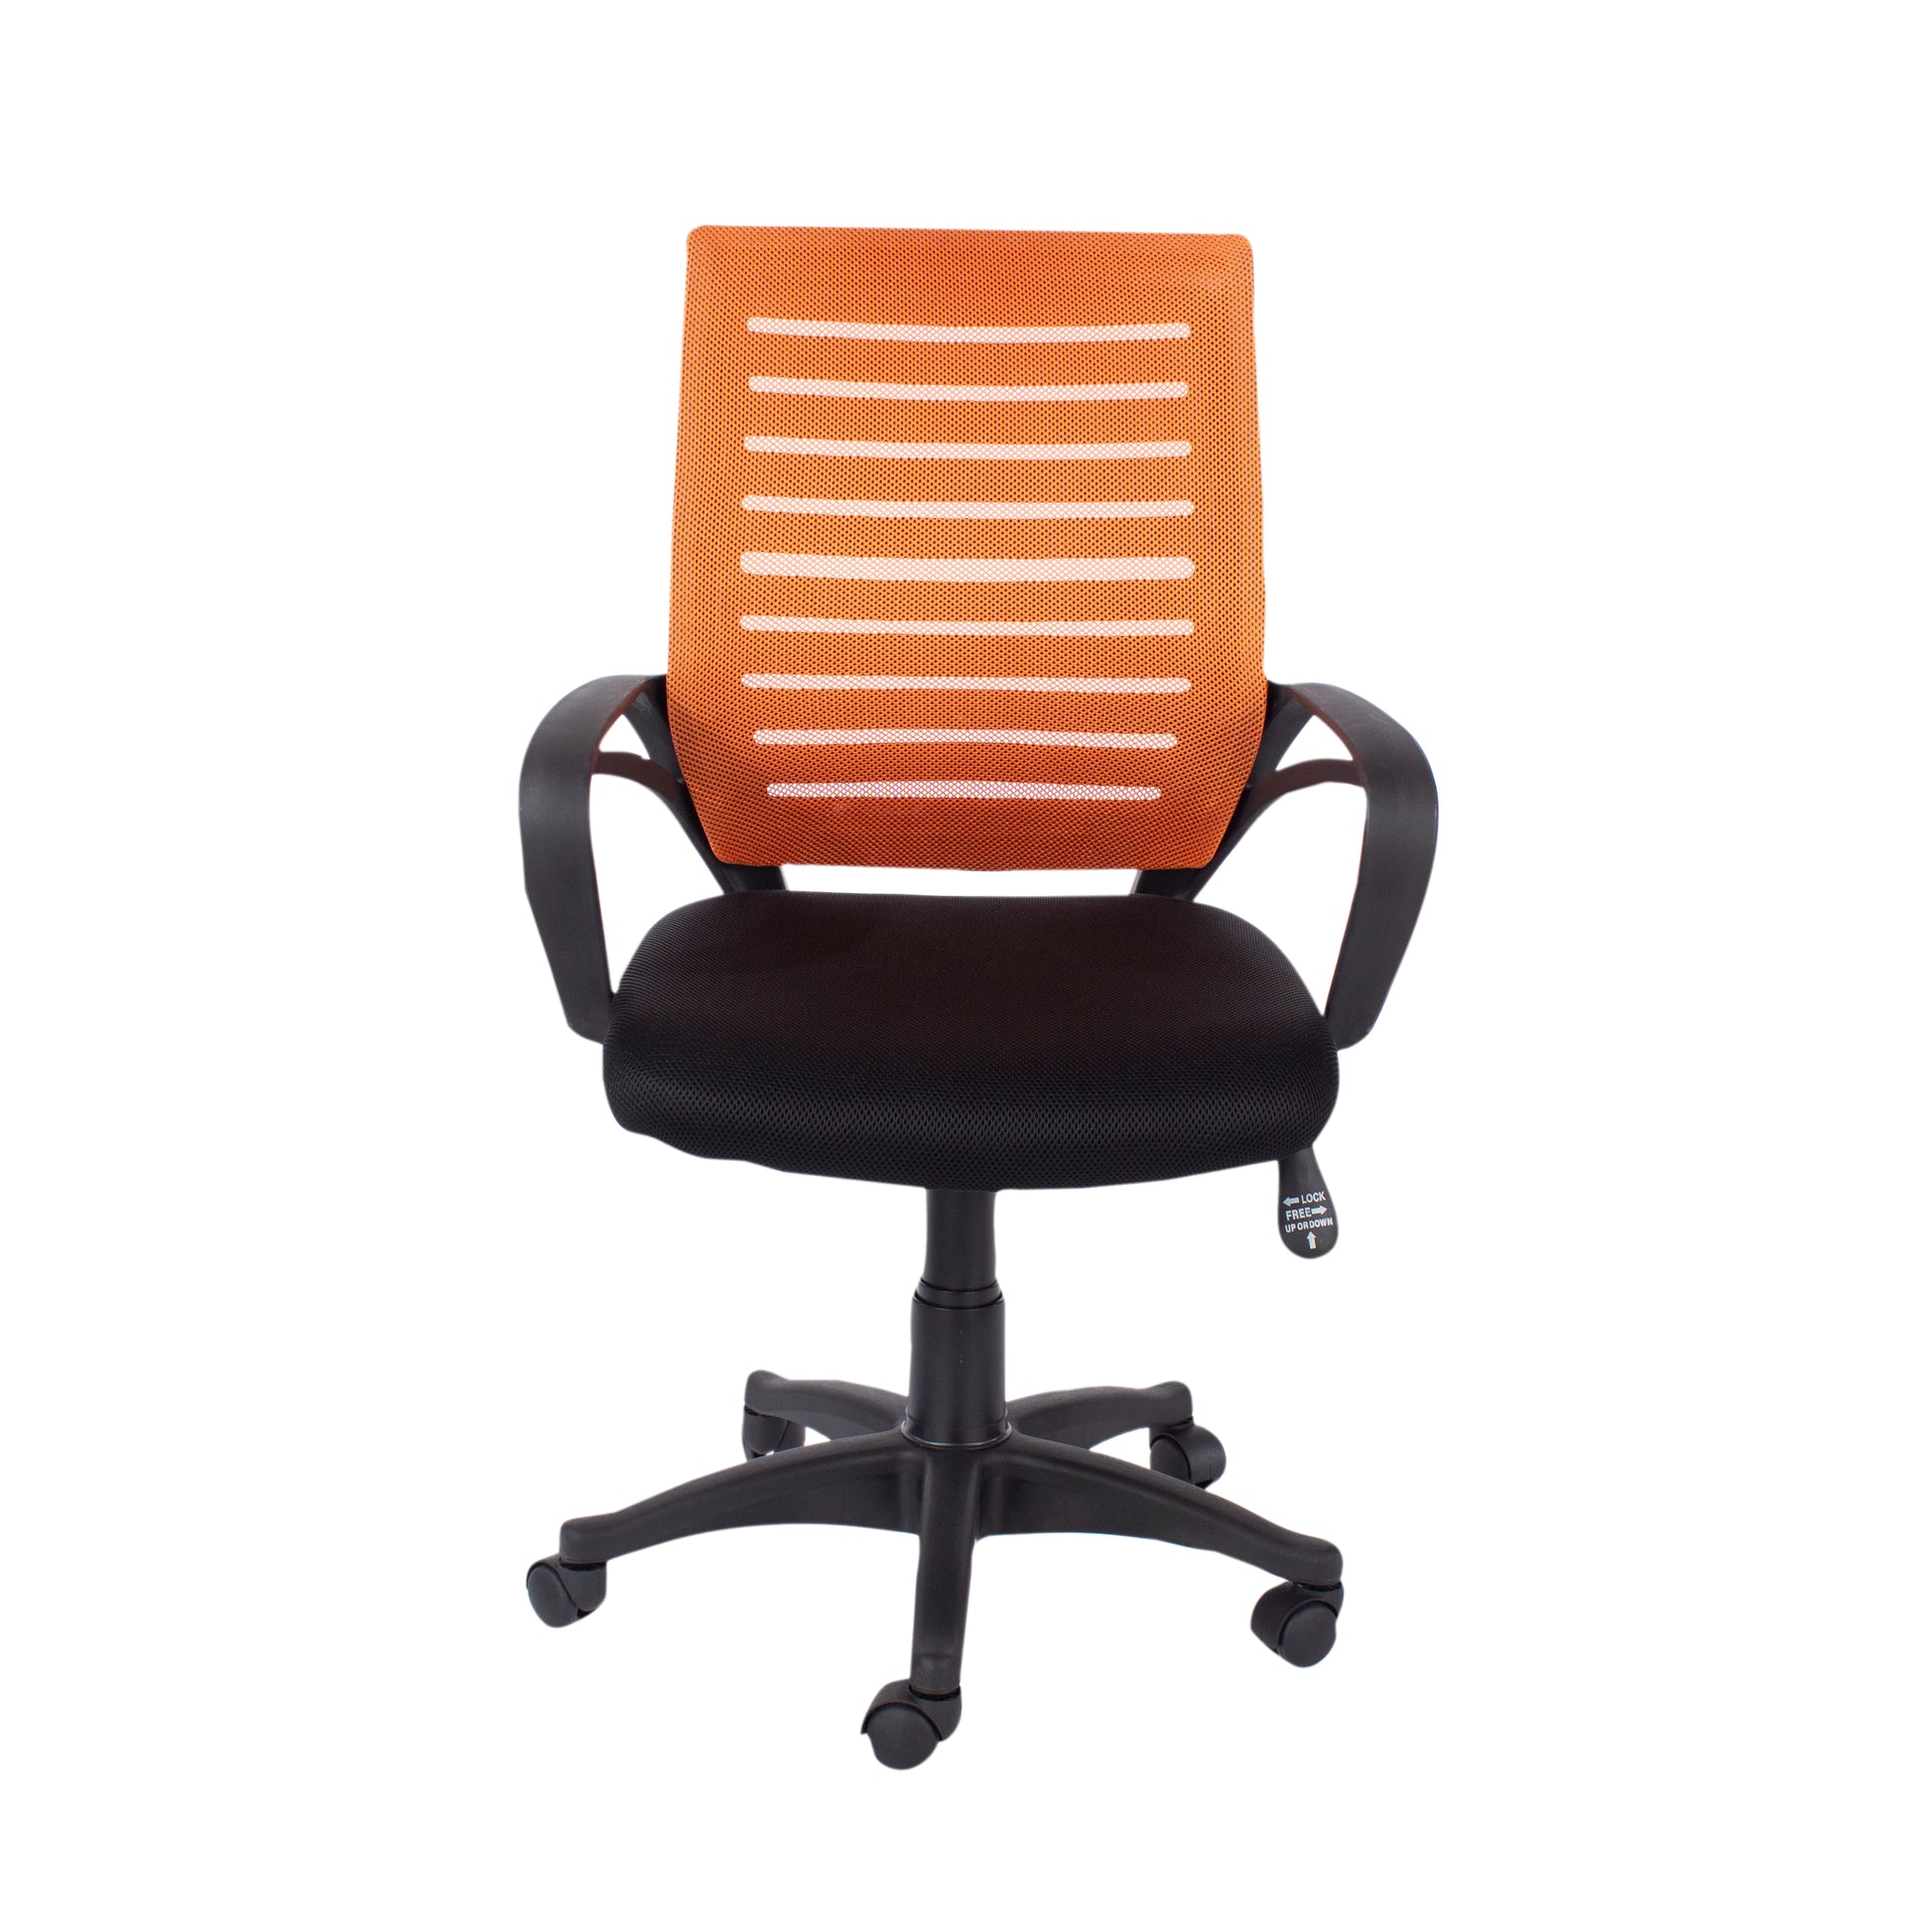 Loft Home Office Study Chair With Arms, Orange Mesh Back, Black Fabric Seat & Black Base